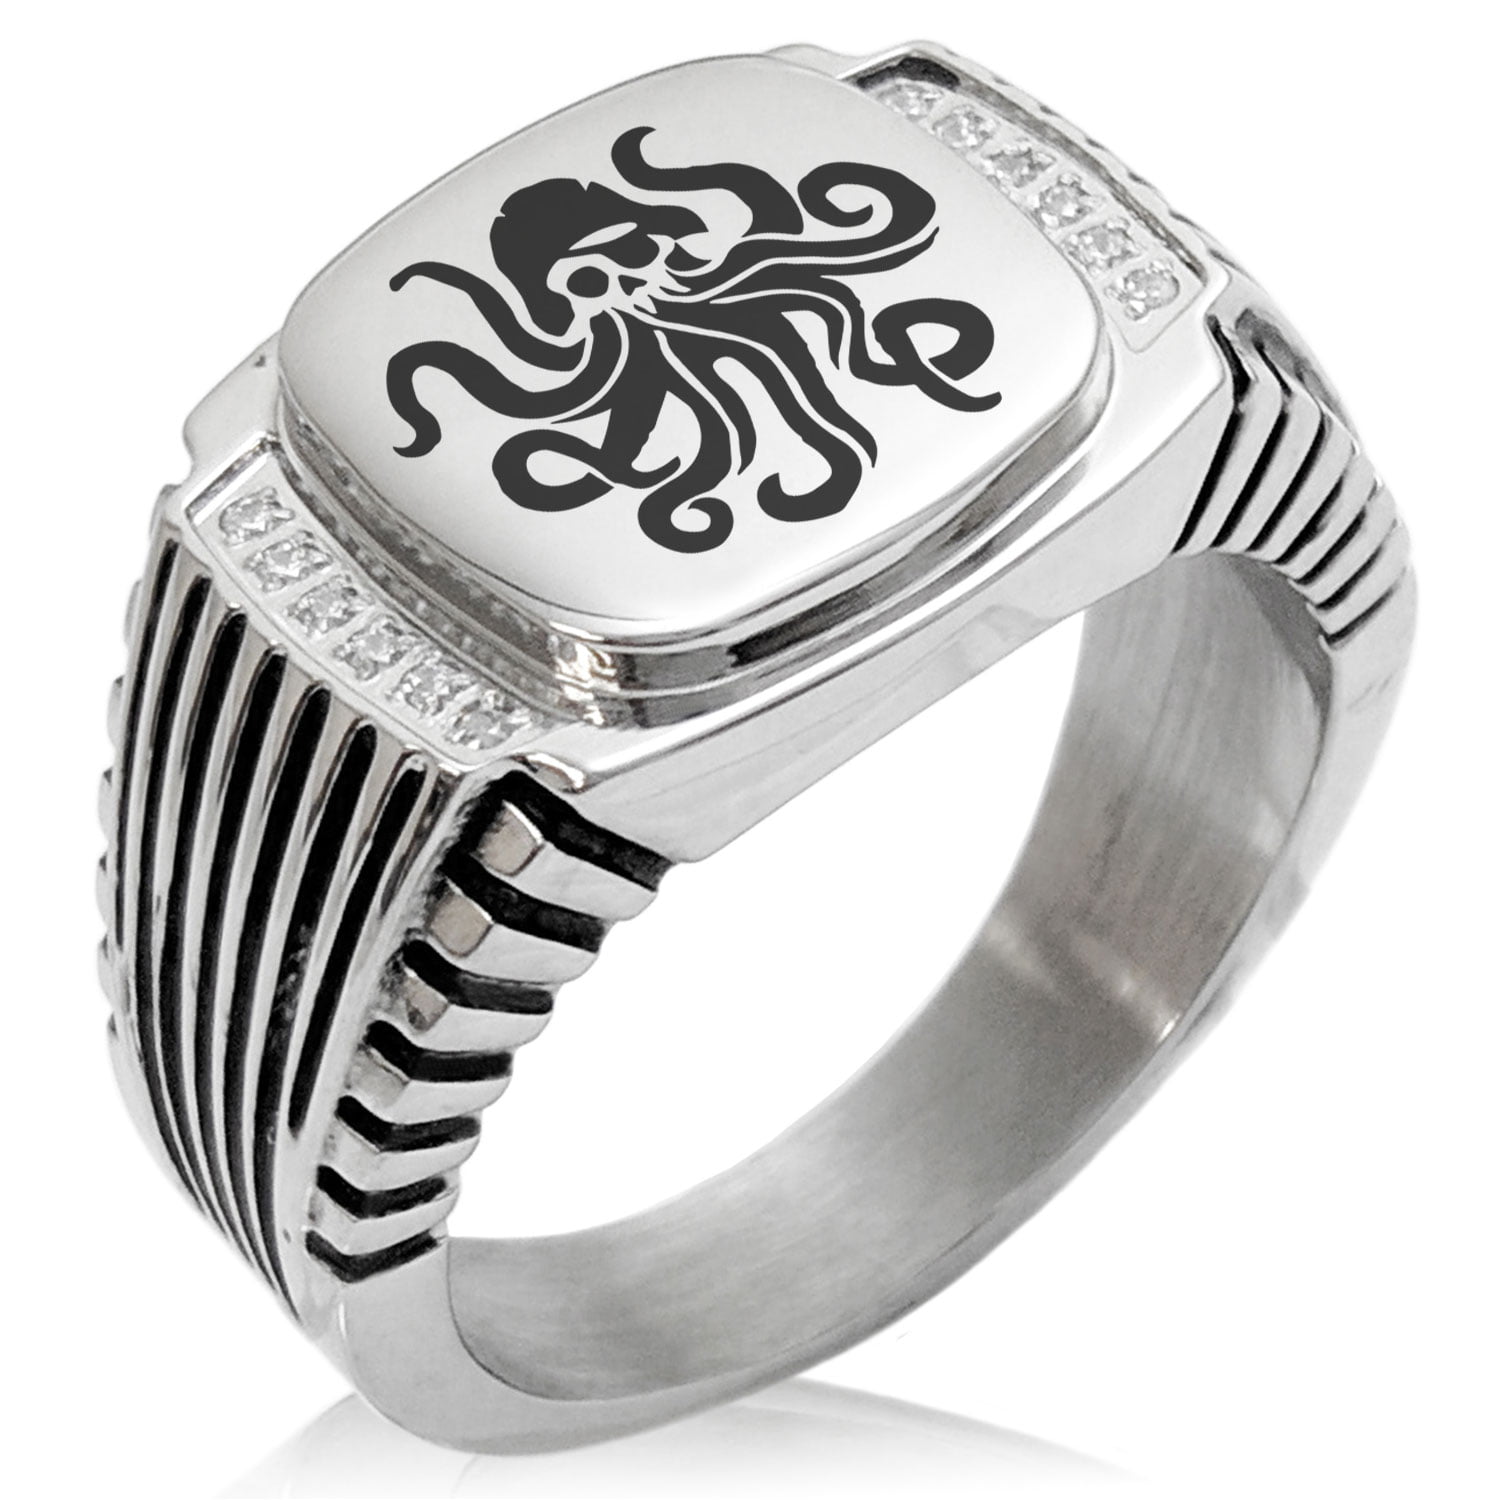 Tioneer Stainless Steel Pirate Anchor & Pistols Emblem Chevron Pattern Biker Style Polished Ring 